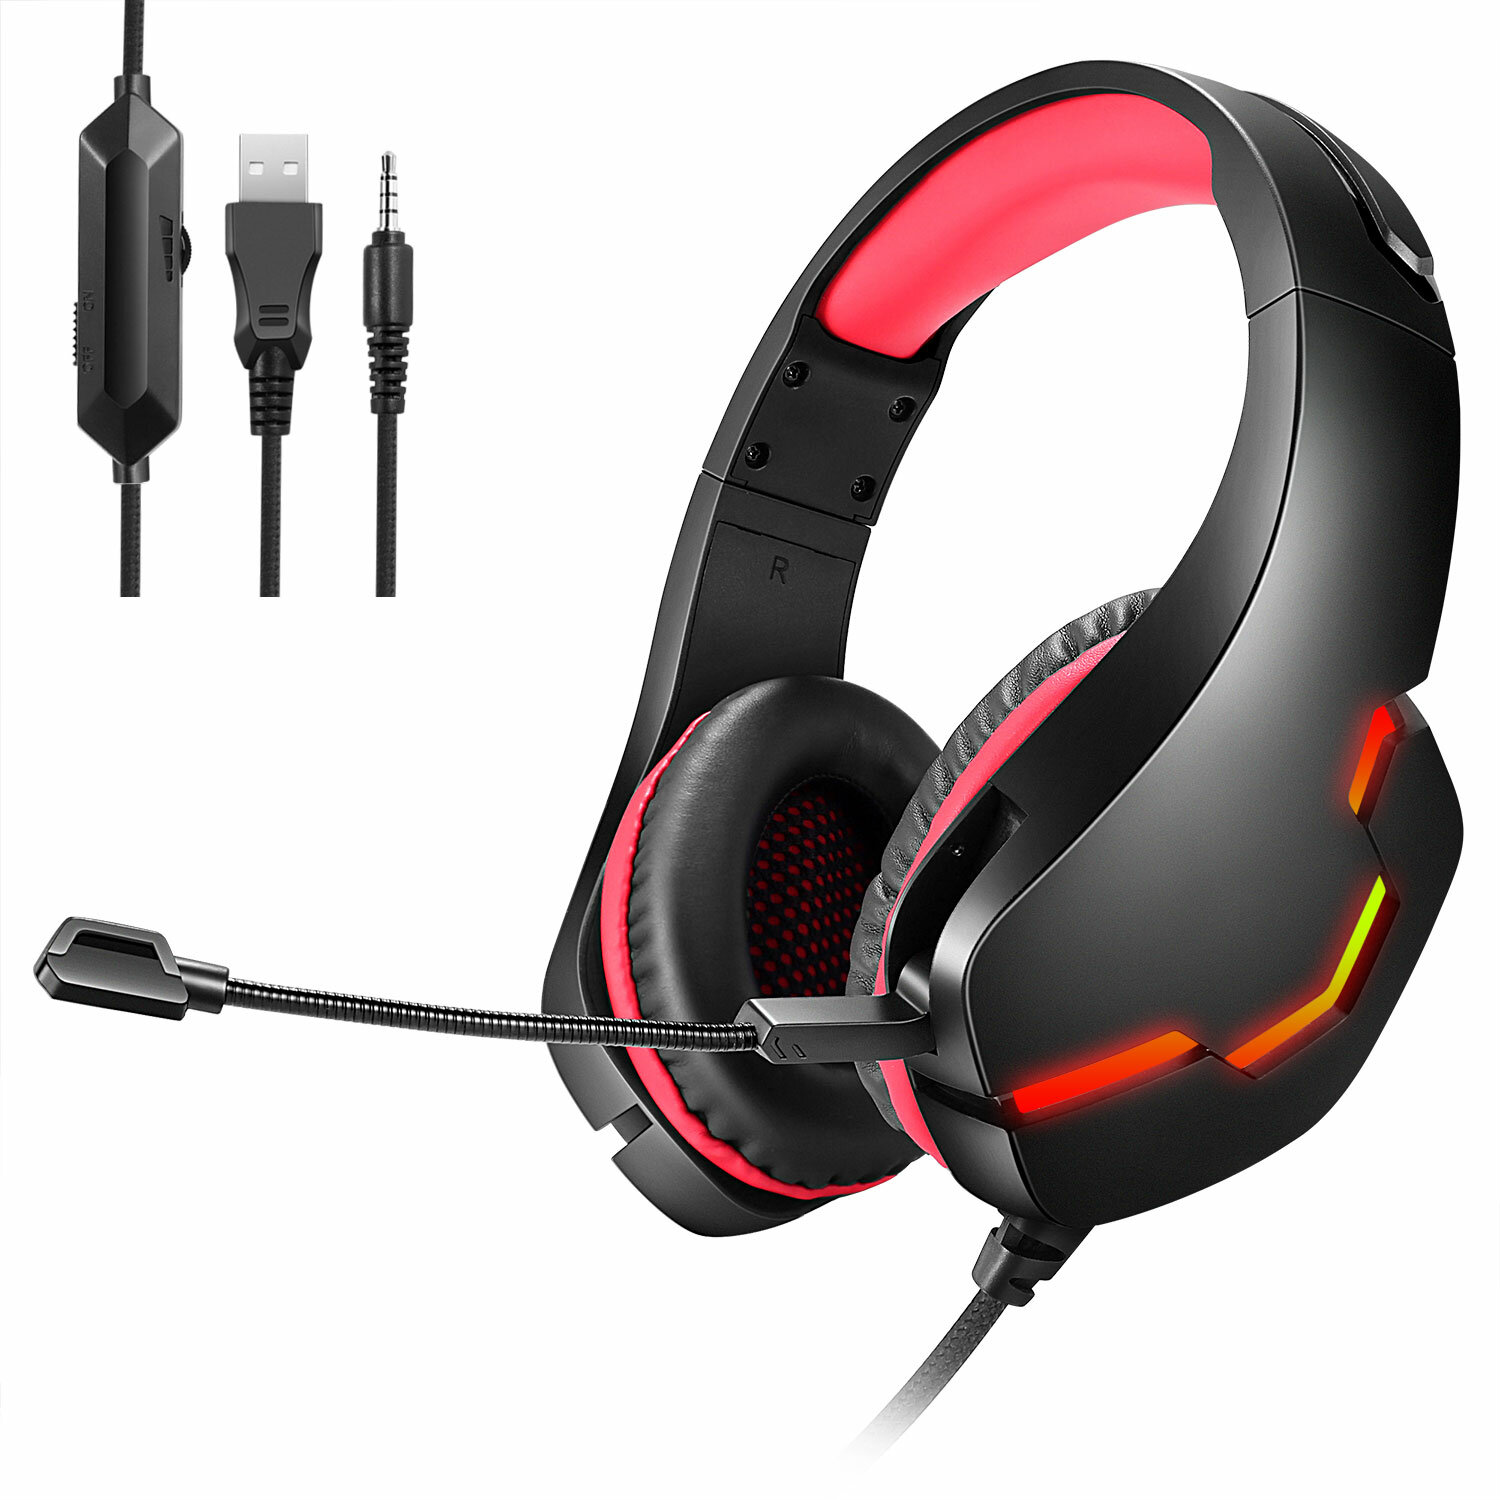 Bakeey J10 Gaming Headset USB 7.1 3.5mm Wired Deep Bass Stereo LED Light Headphone with Mic for PS4 